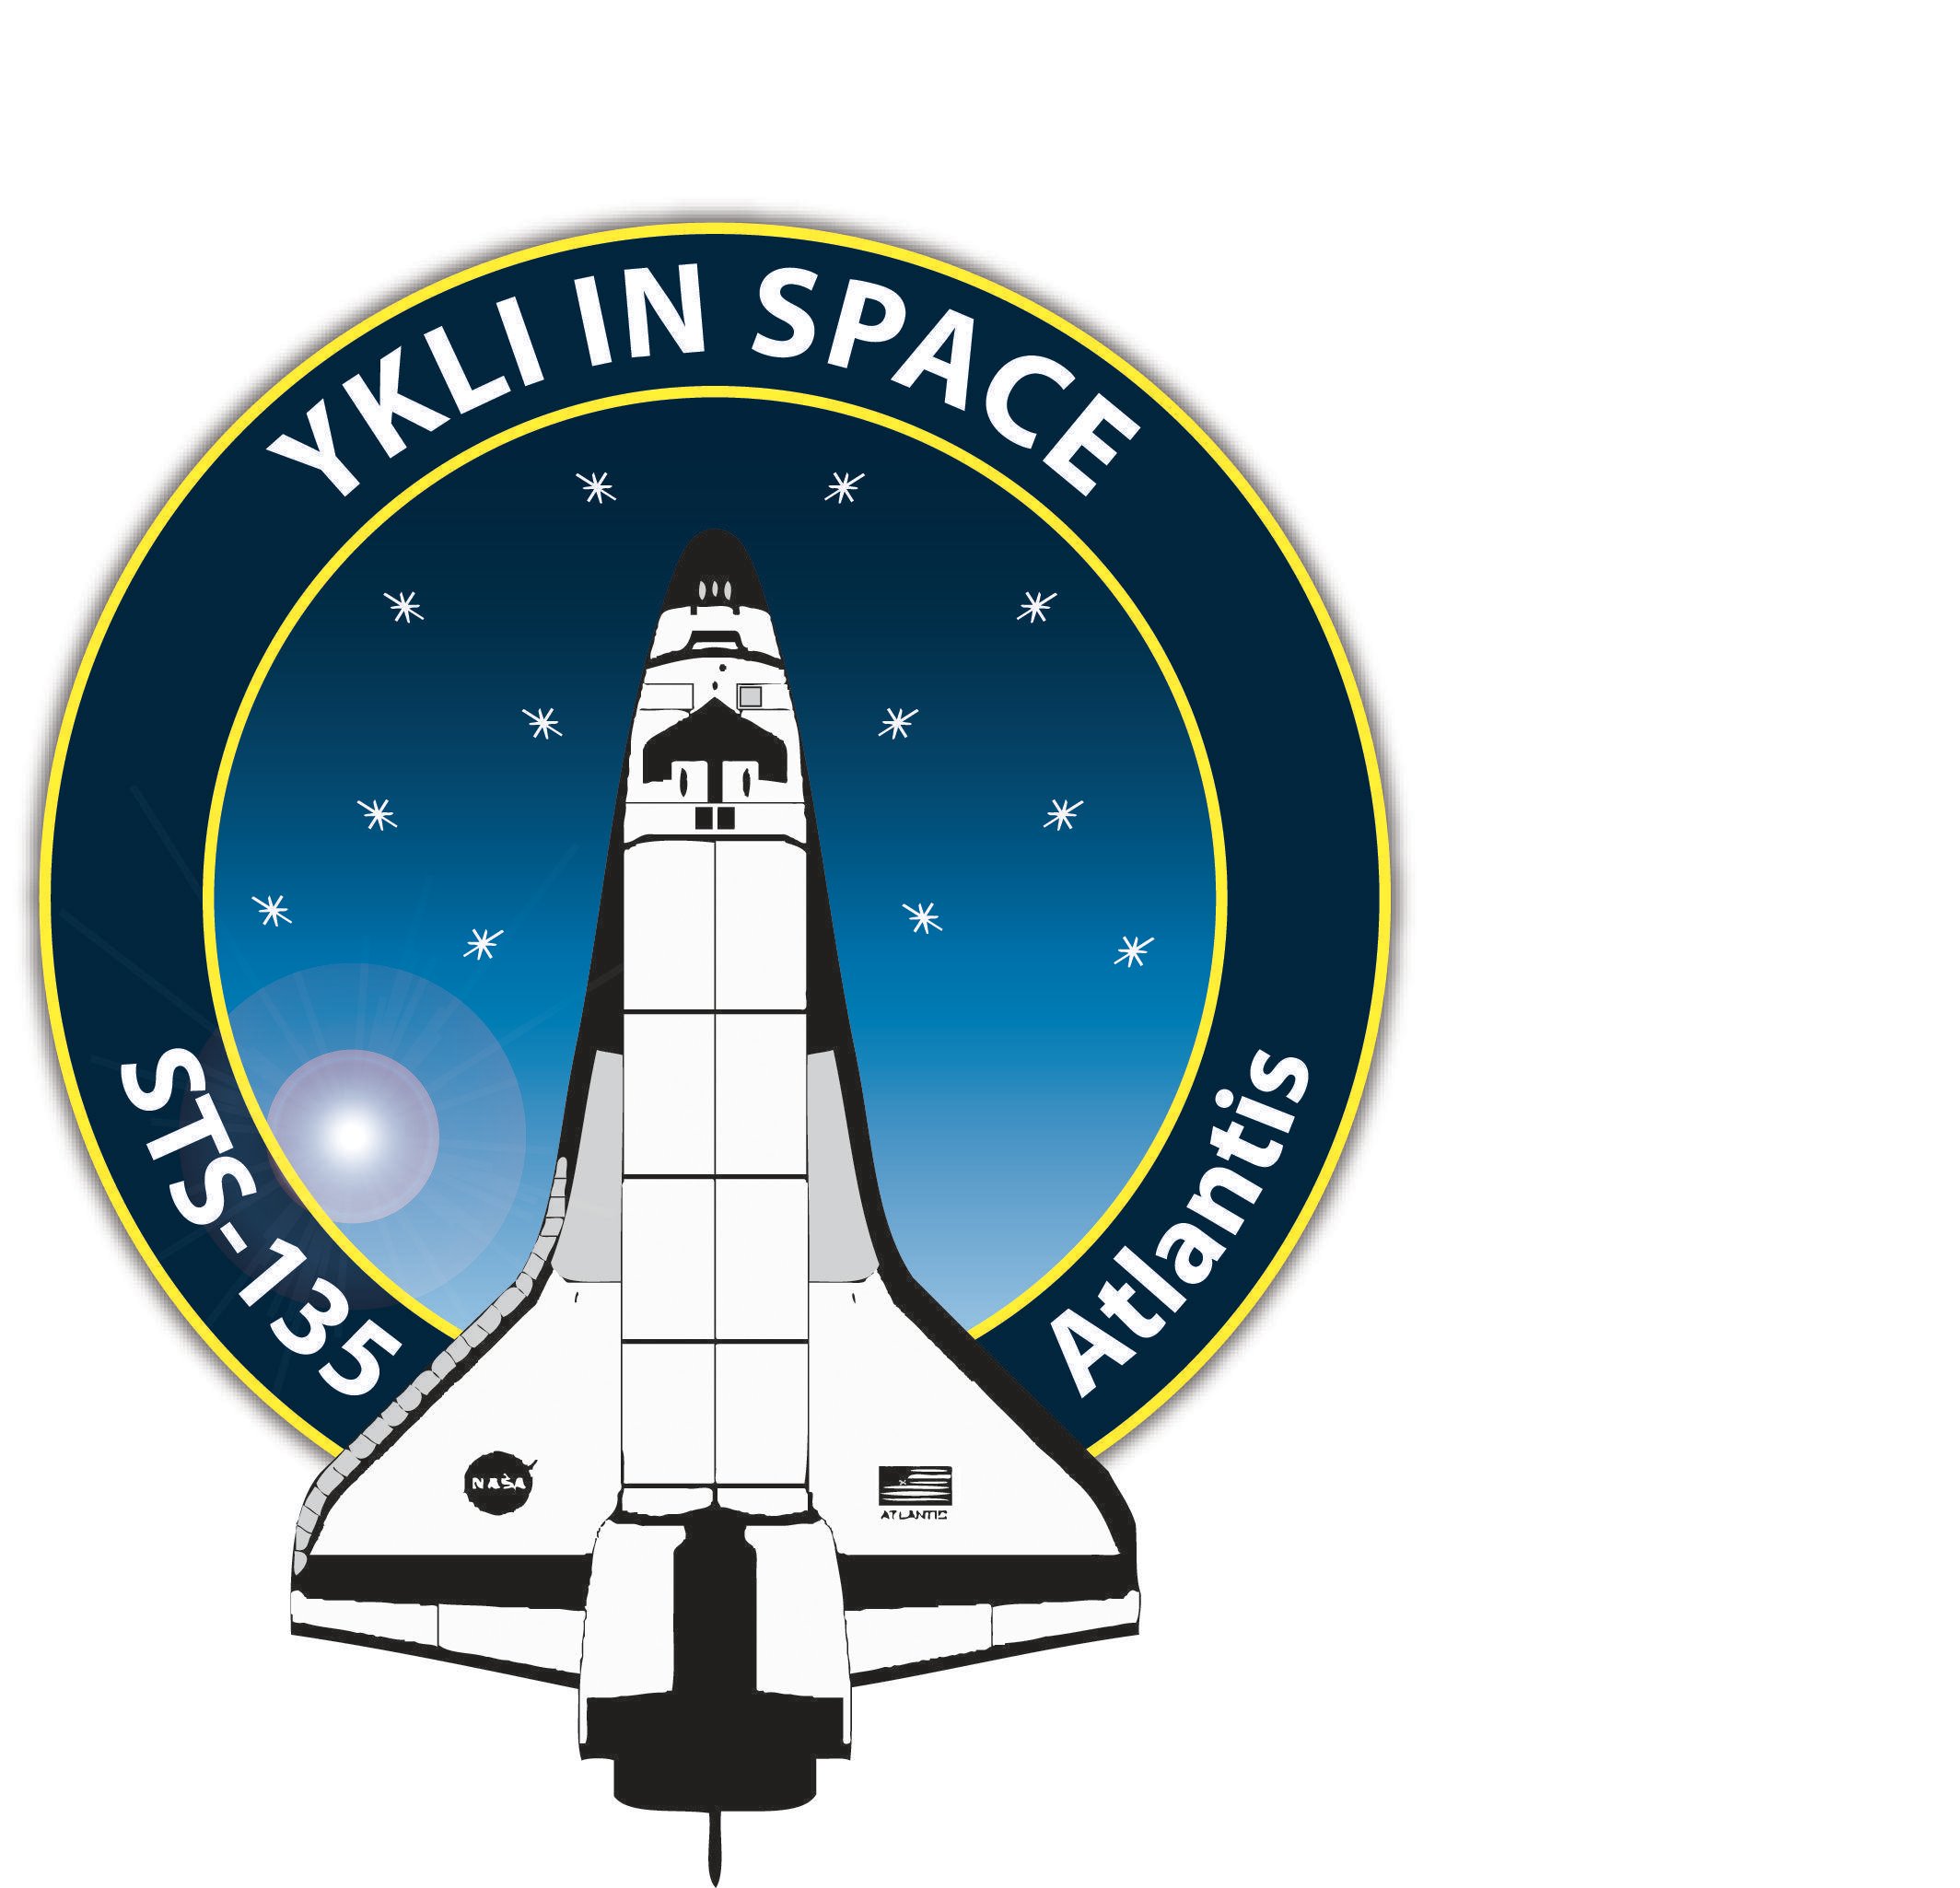 Space Shuttle Logo - Pin by Frederick Longo on Space Shuttle Patches | Space shuttle ...